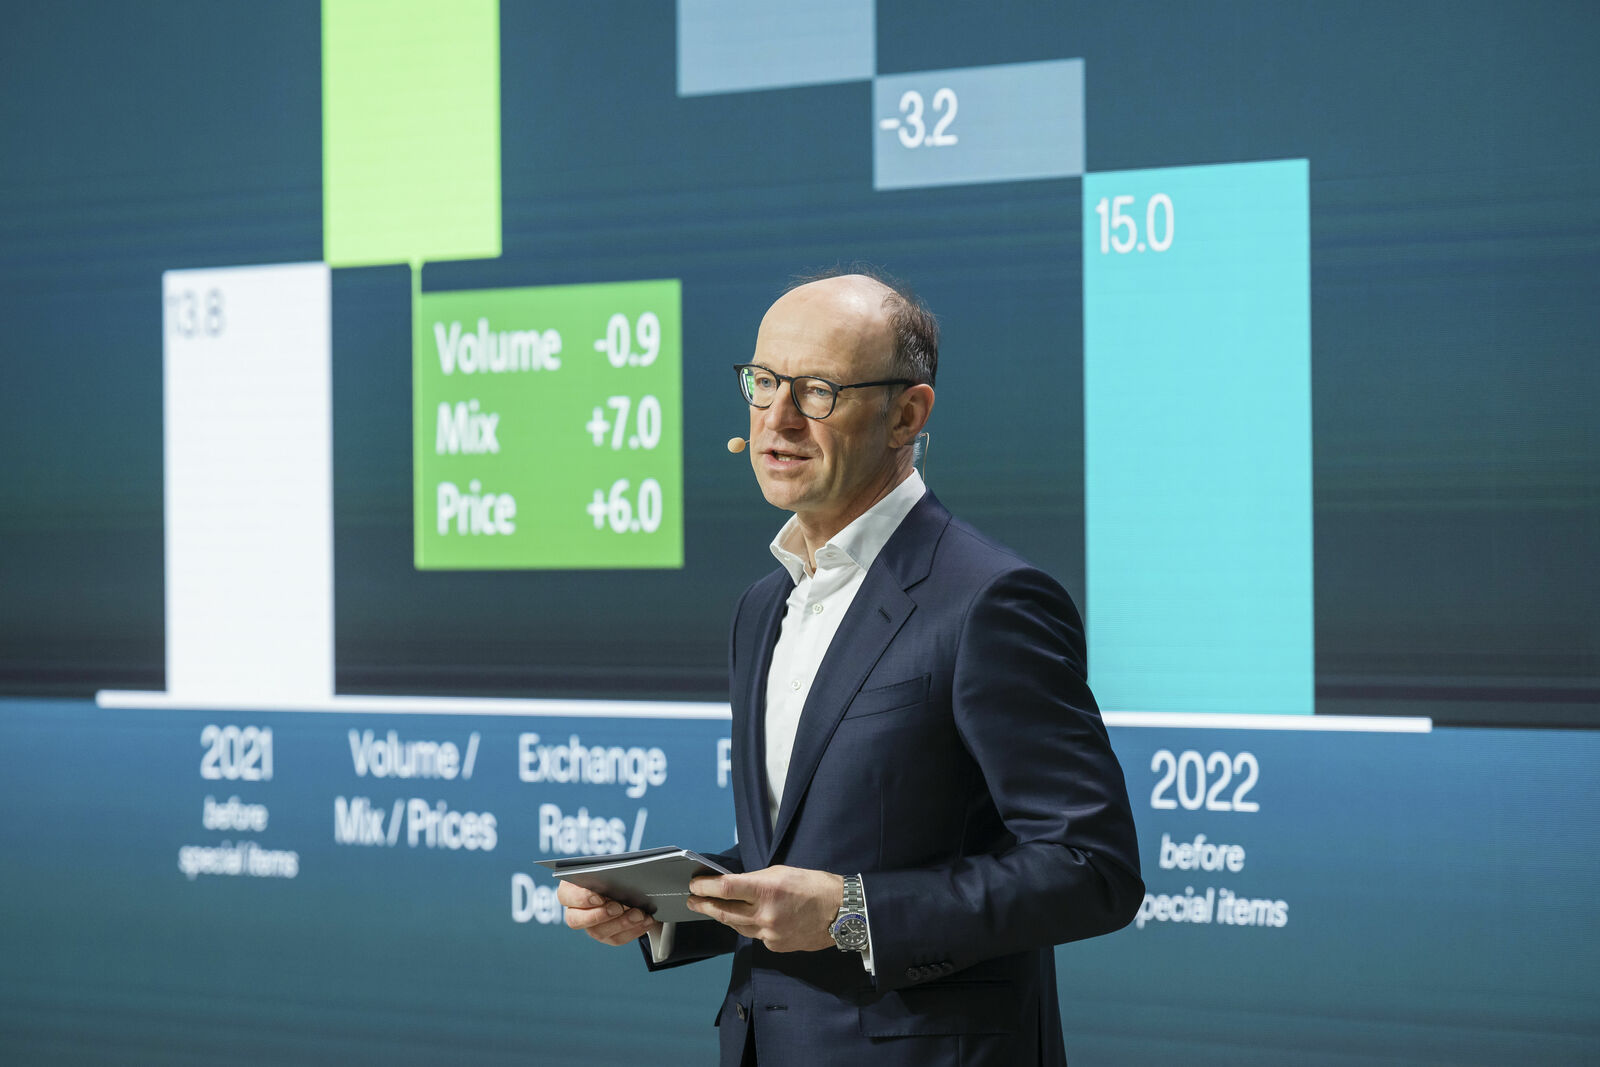 Arno Antlitz, CFO and COO Volkswagen Group, during Annual Media Conference